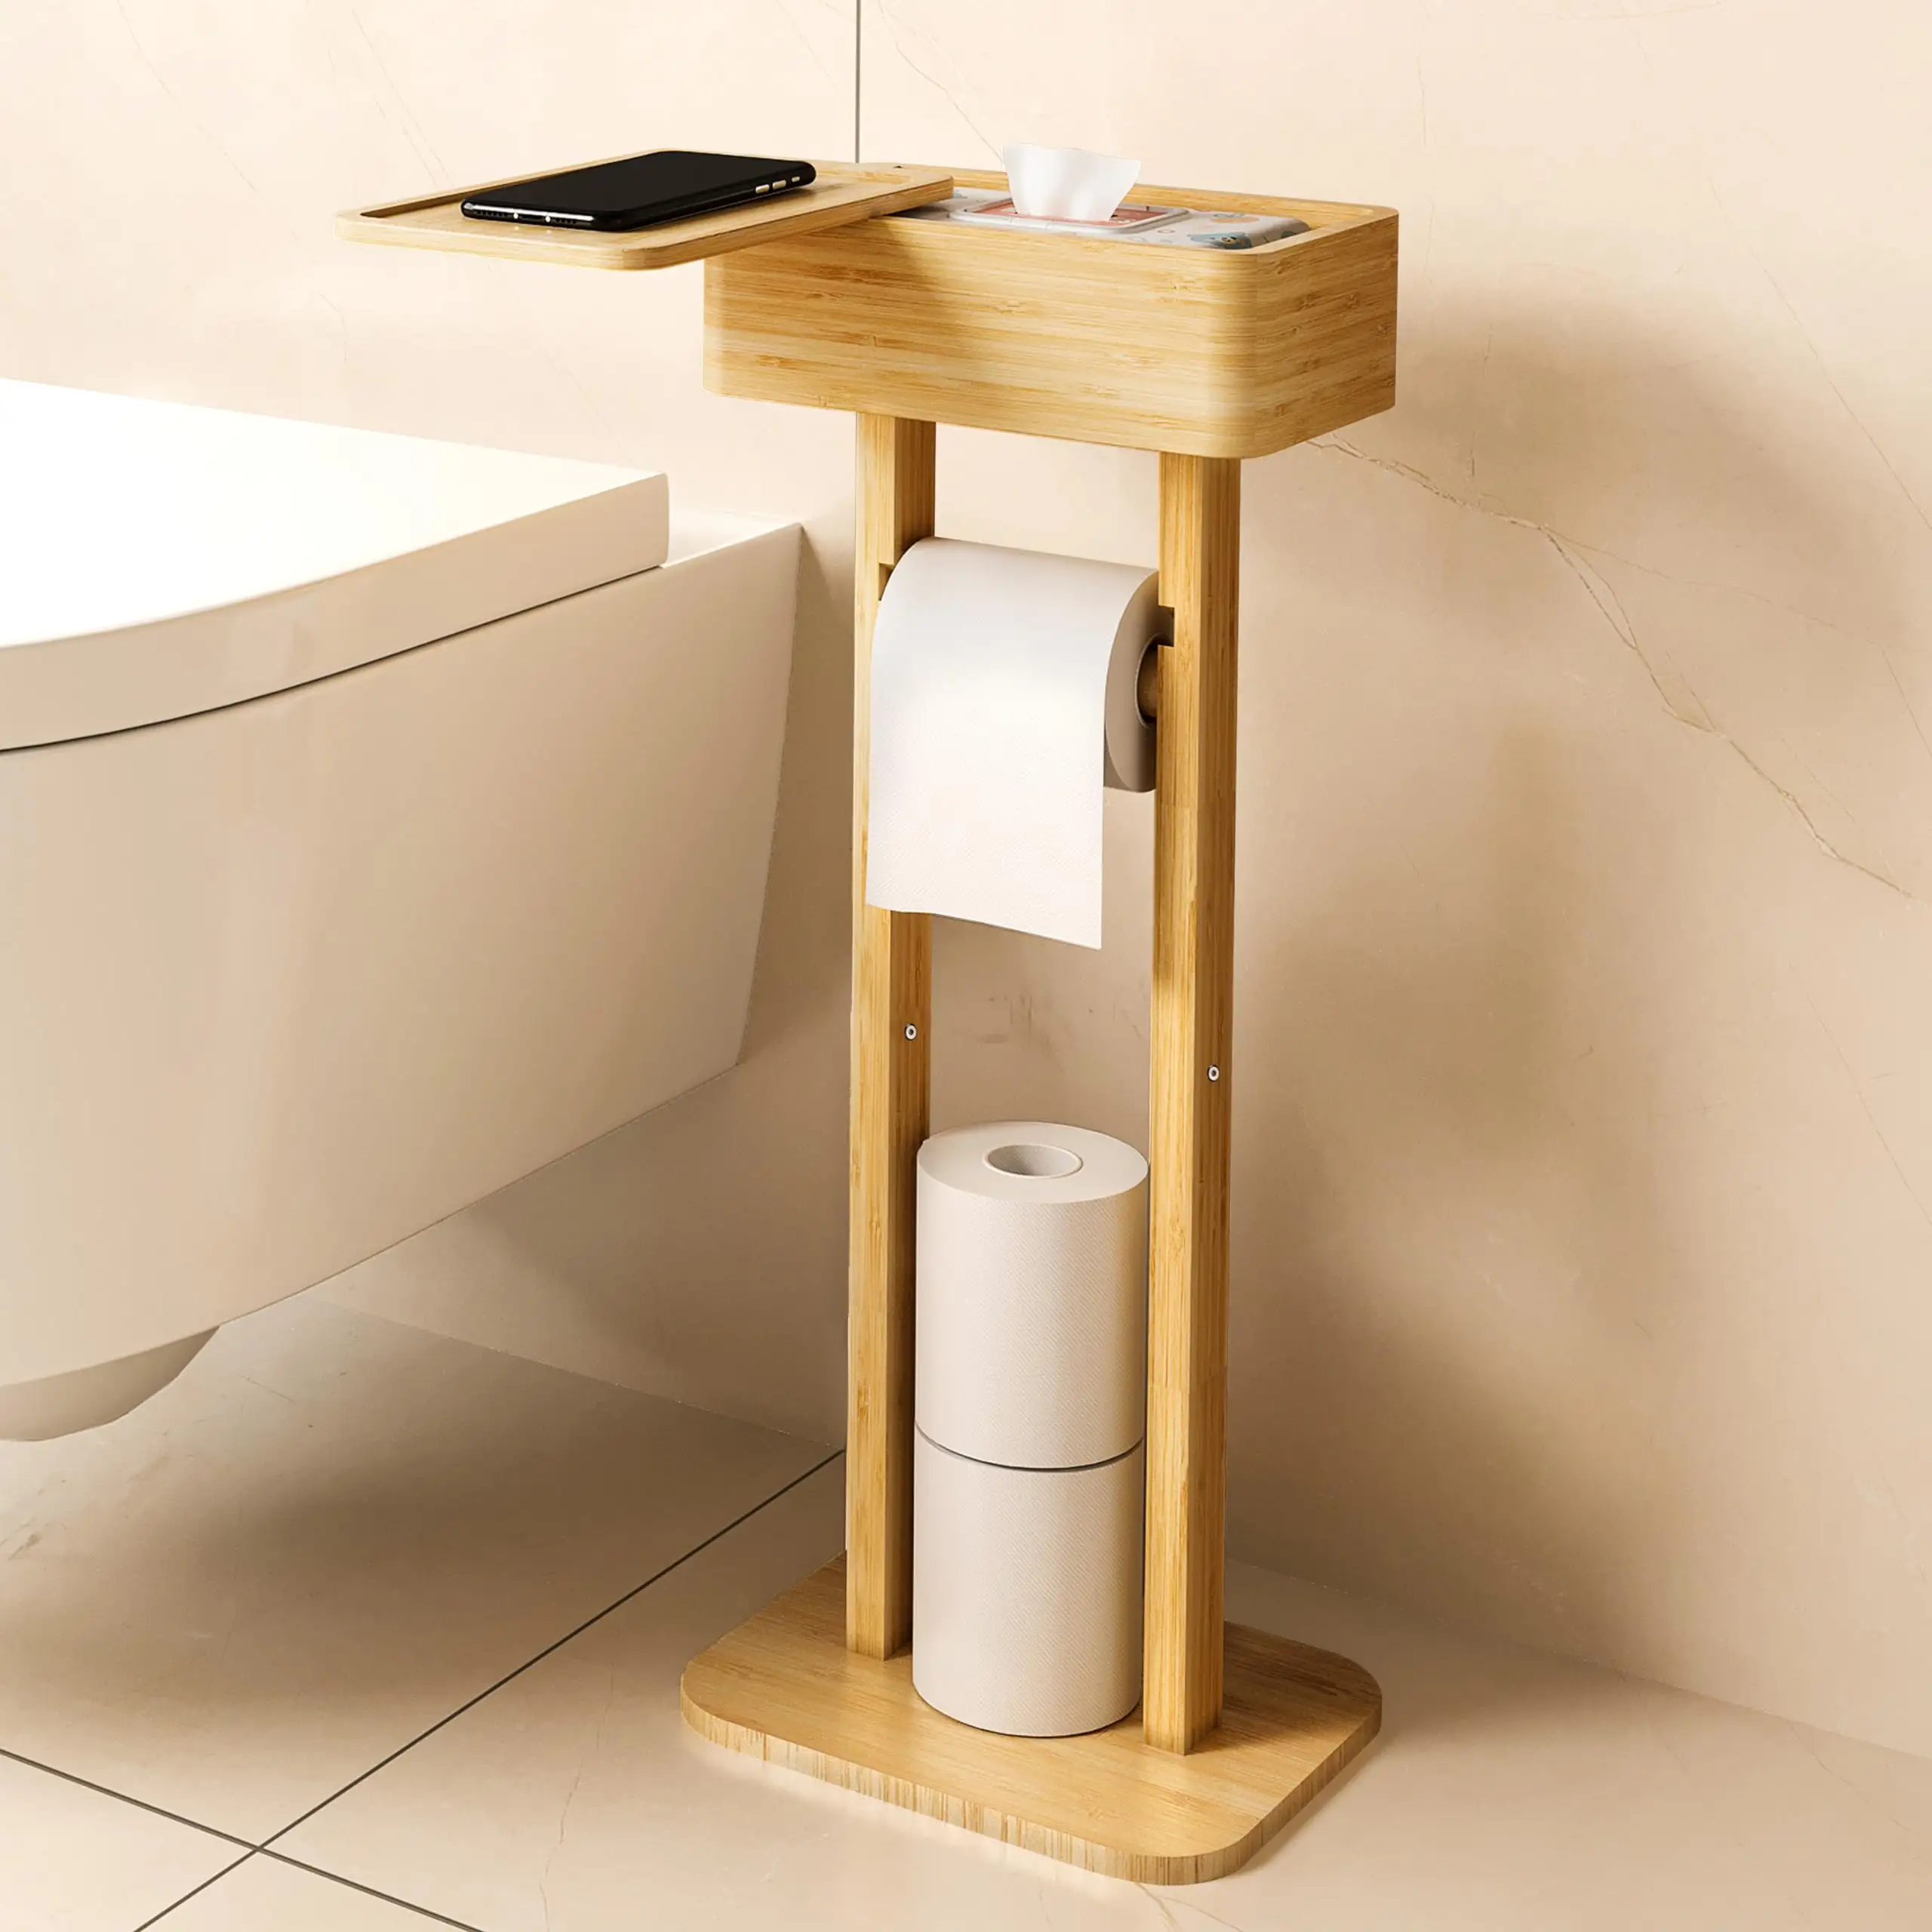 4-in-1 Freestanding Bamboo Toilet Paper Holder with Top Storage Compartment Toilet Towel Holder Rack with Storage for Bathroom